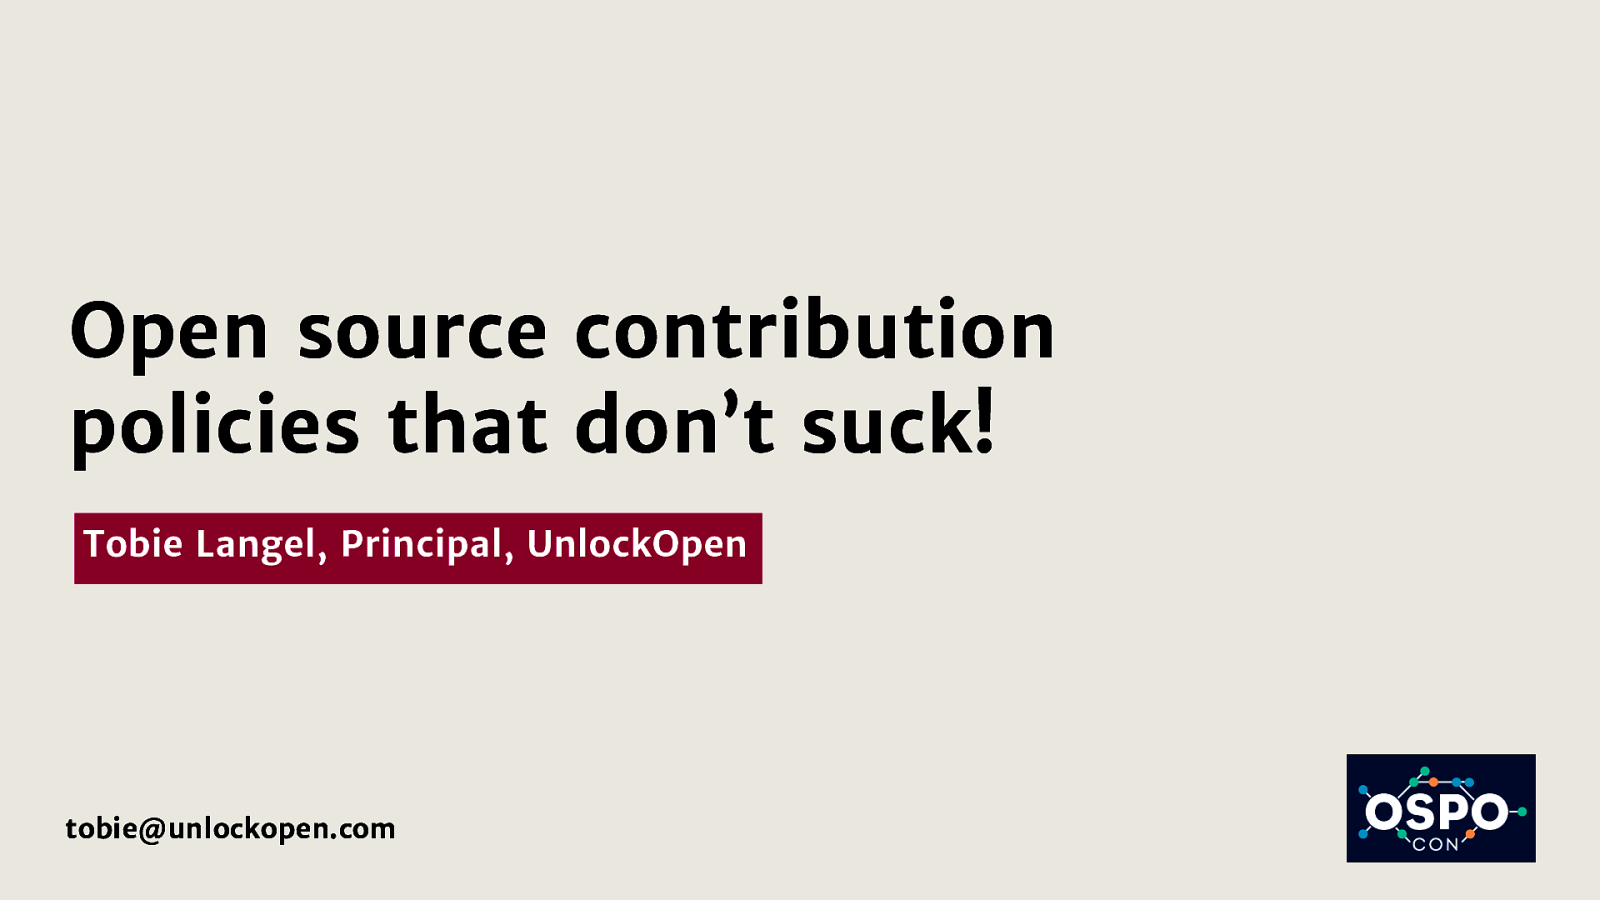 Open source contribution policies that don’t suck